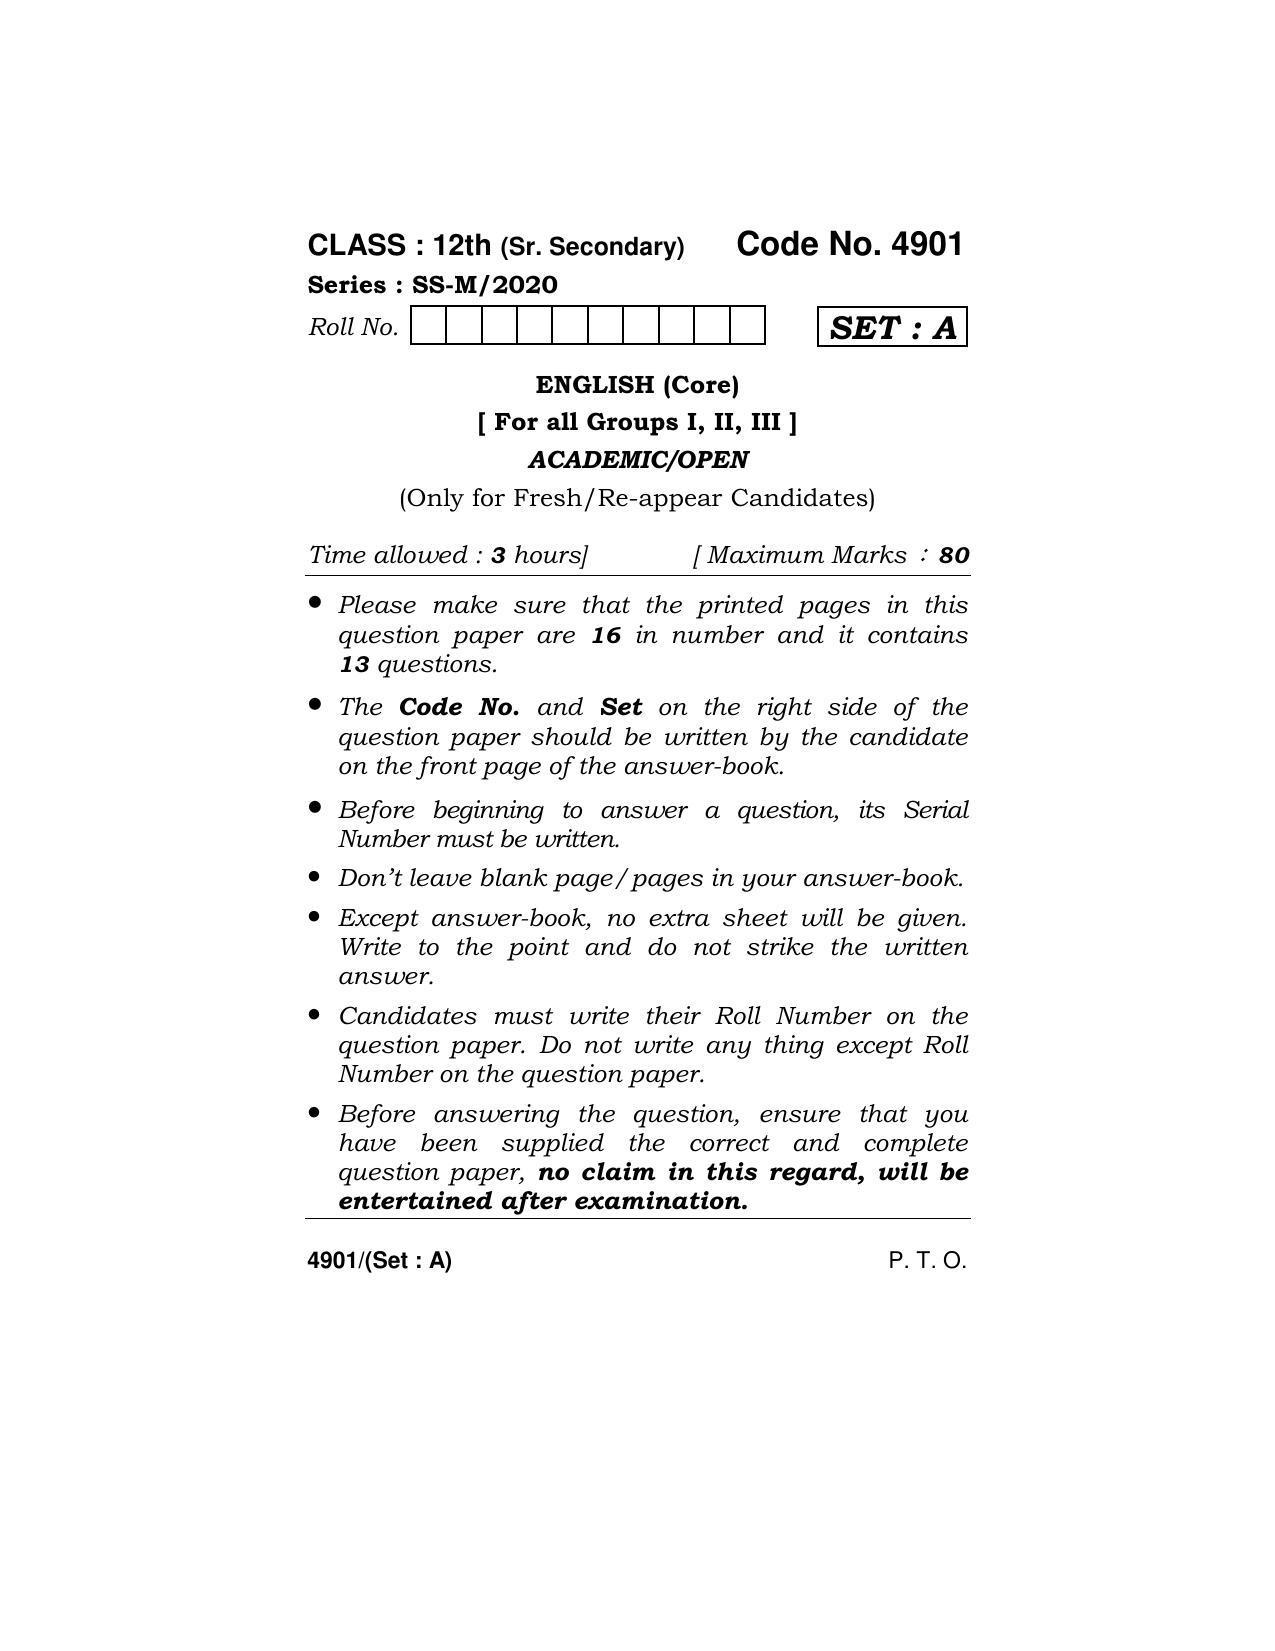 Haryana Board HBSE Class 12 English Core 2020 Question Paper - Page 1